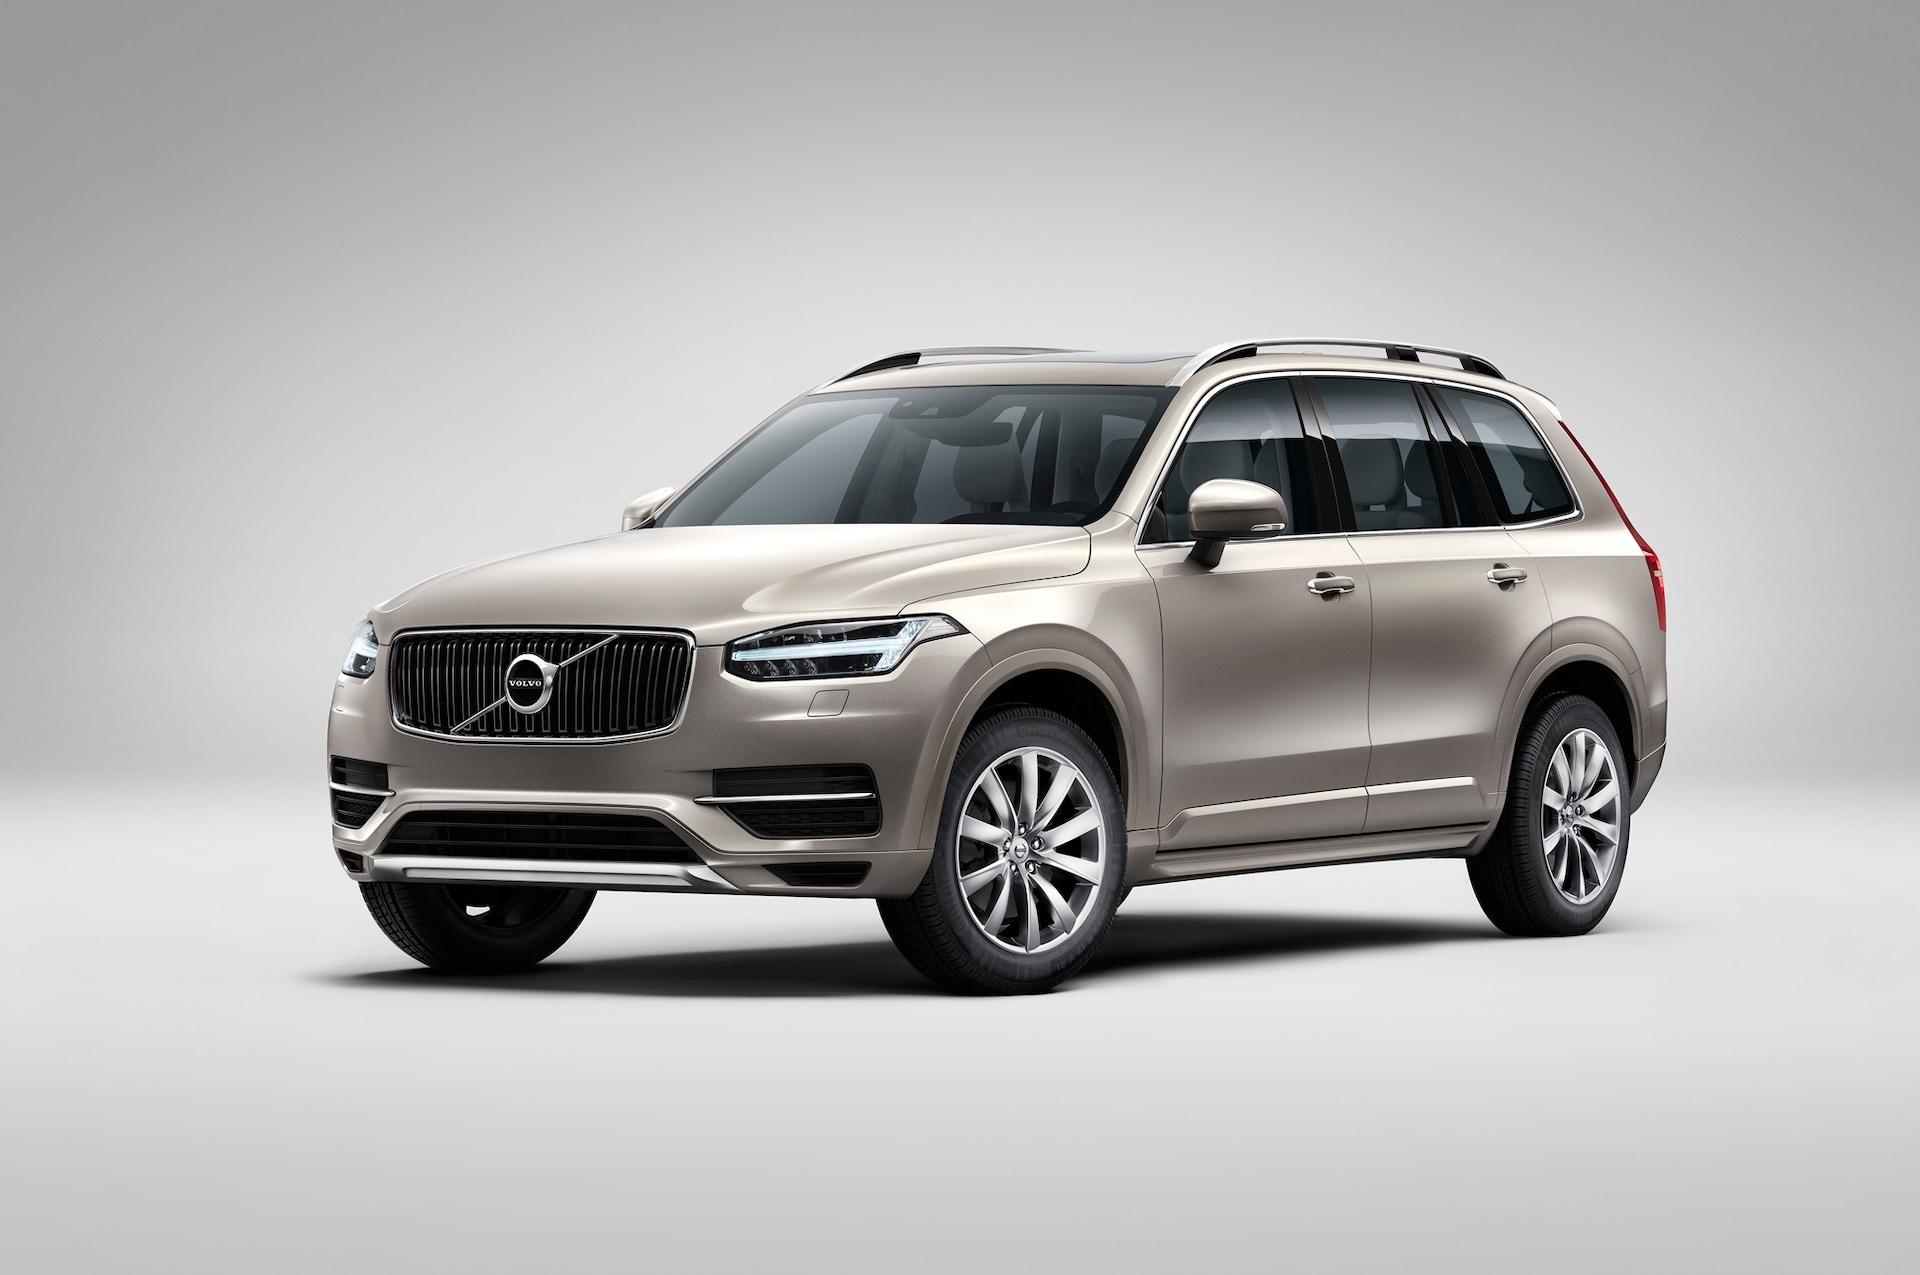 10 Cool Facts About the All-New 2016 Volvo XC90